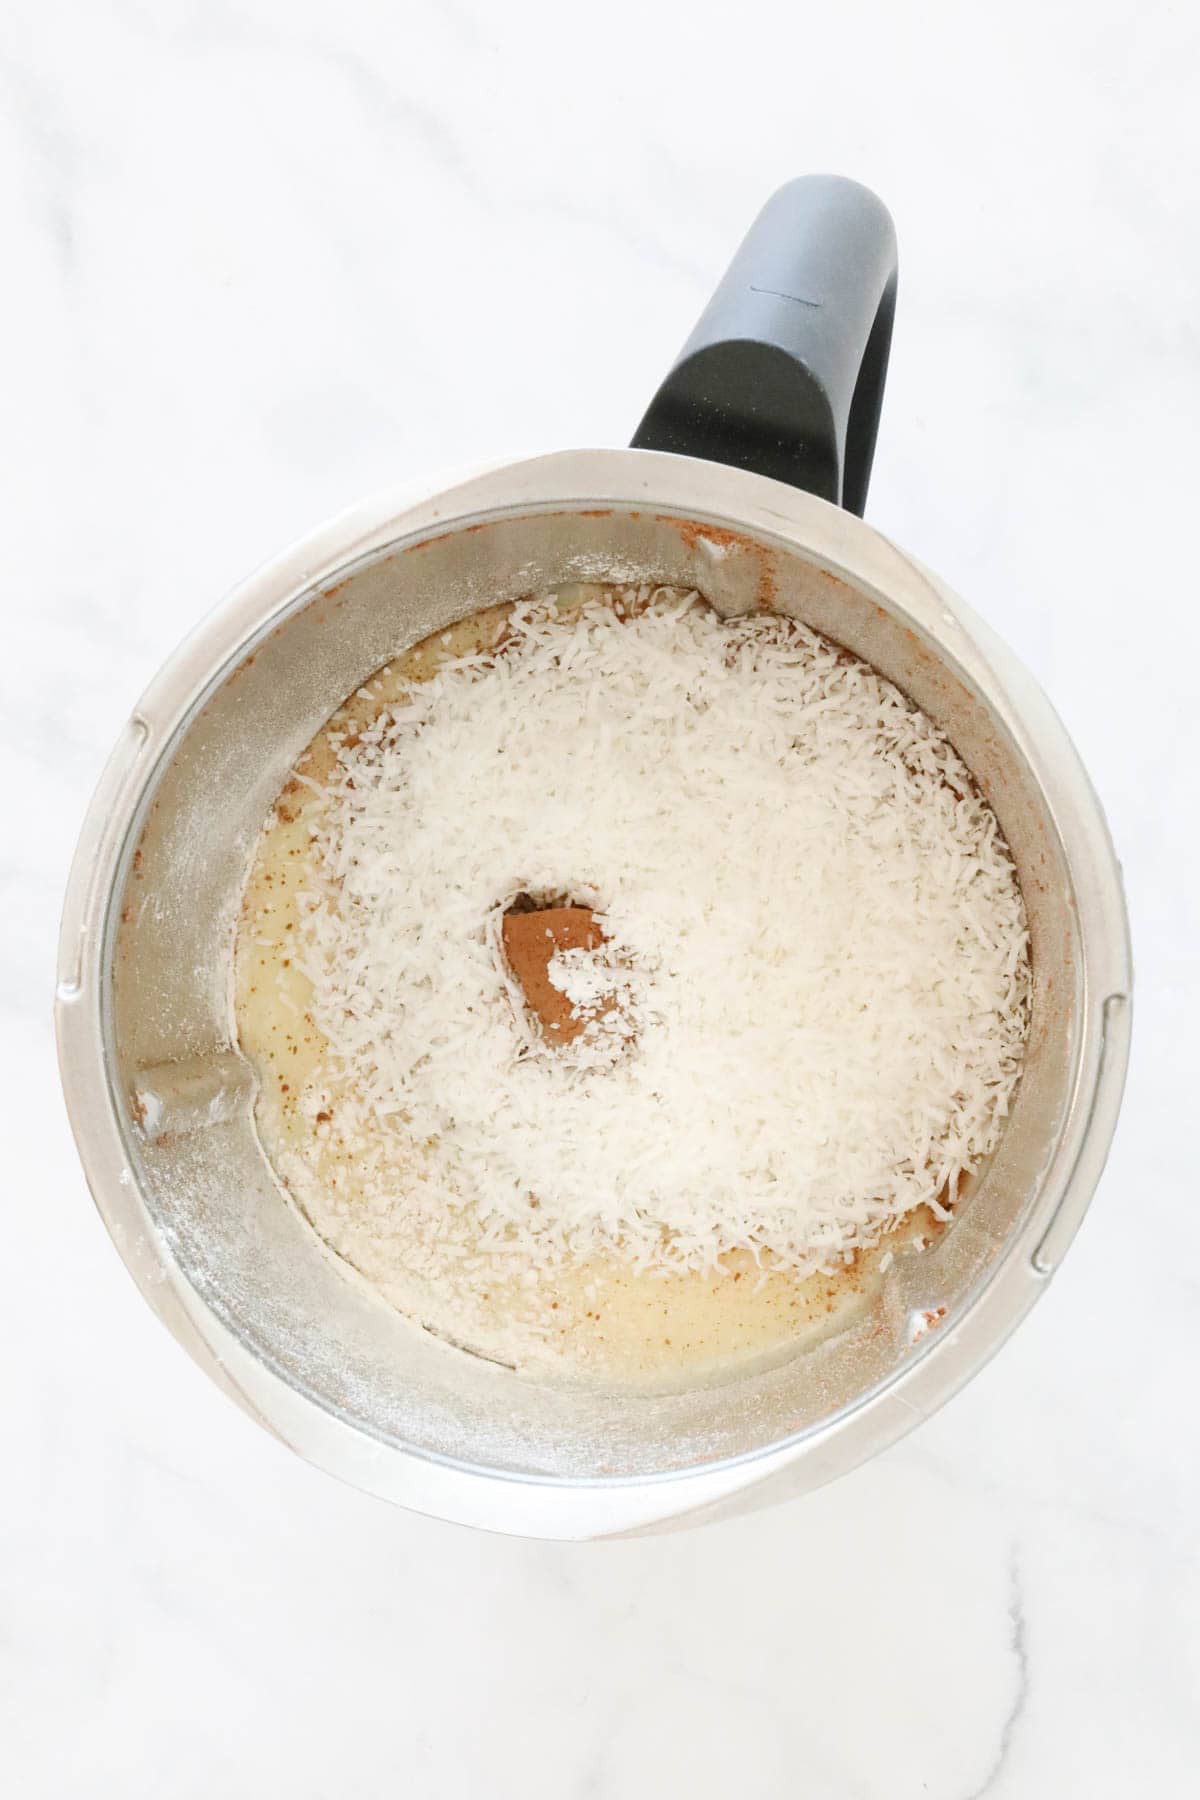 Coconut in a Thermomix.